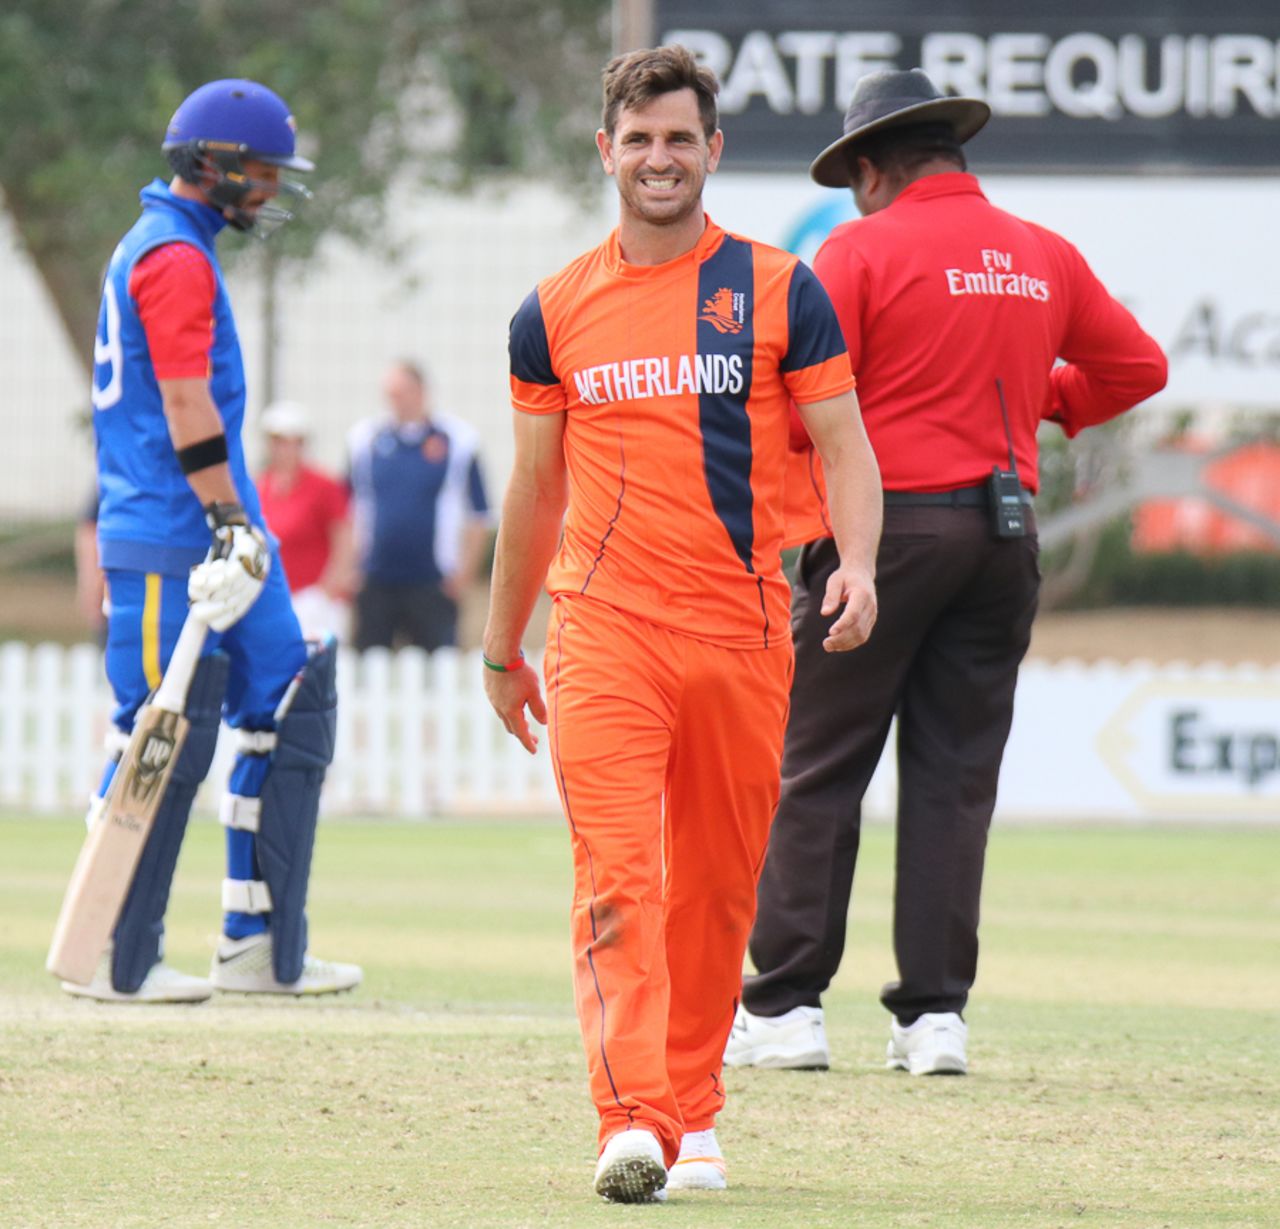 Ryan ten Doeschate smiles on the way to his mark during his first bowling spell back with the Netherlands, Namibia v Netherlands, 2015-17 WCL Championship, Dubai, December 8, 2017